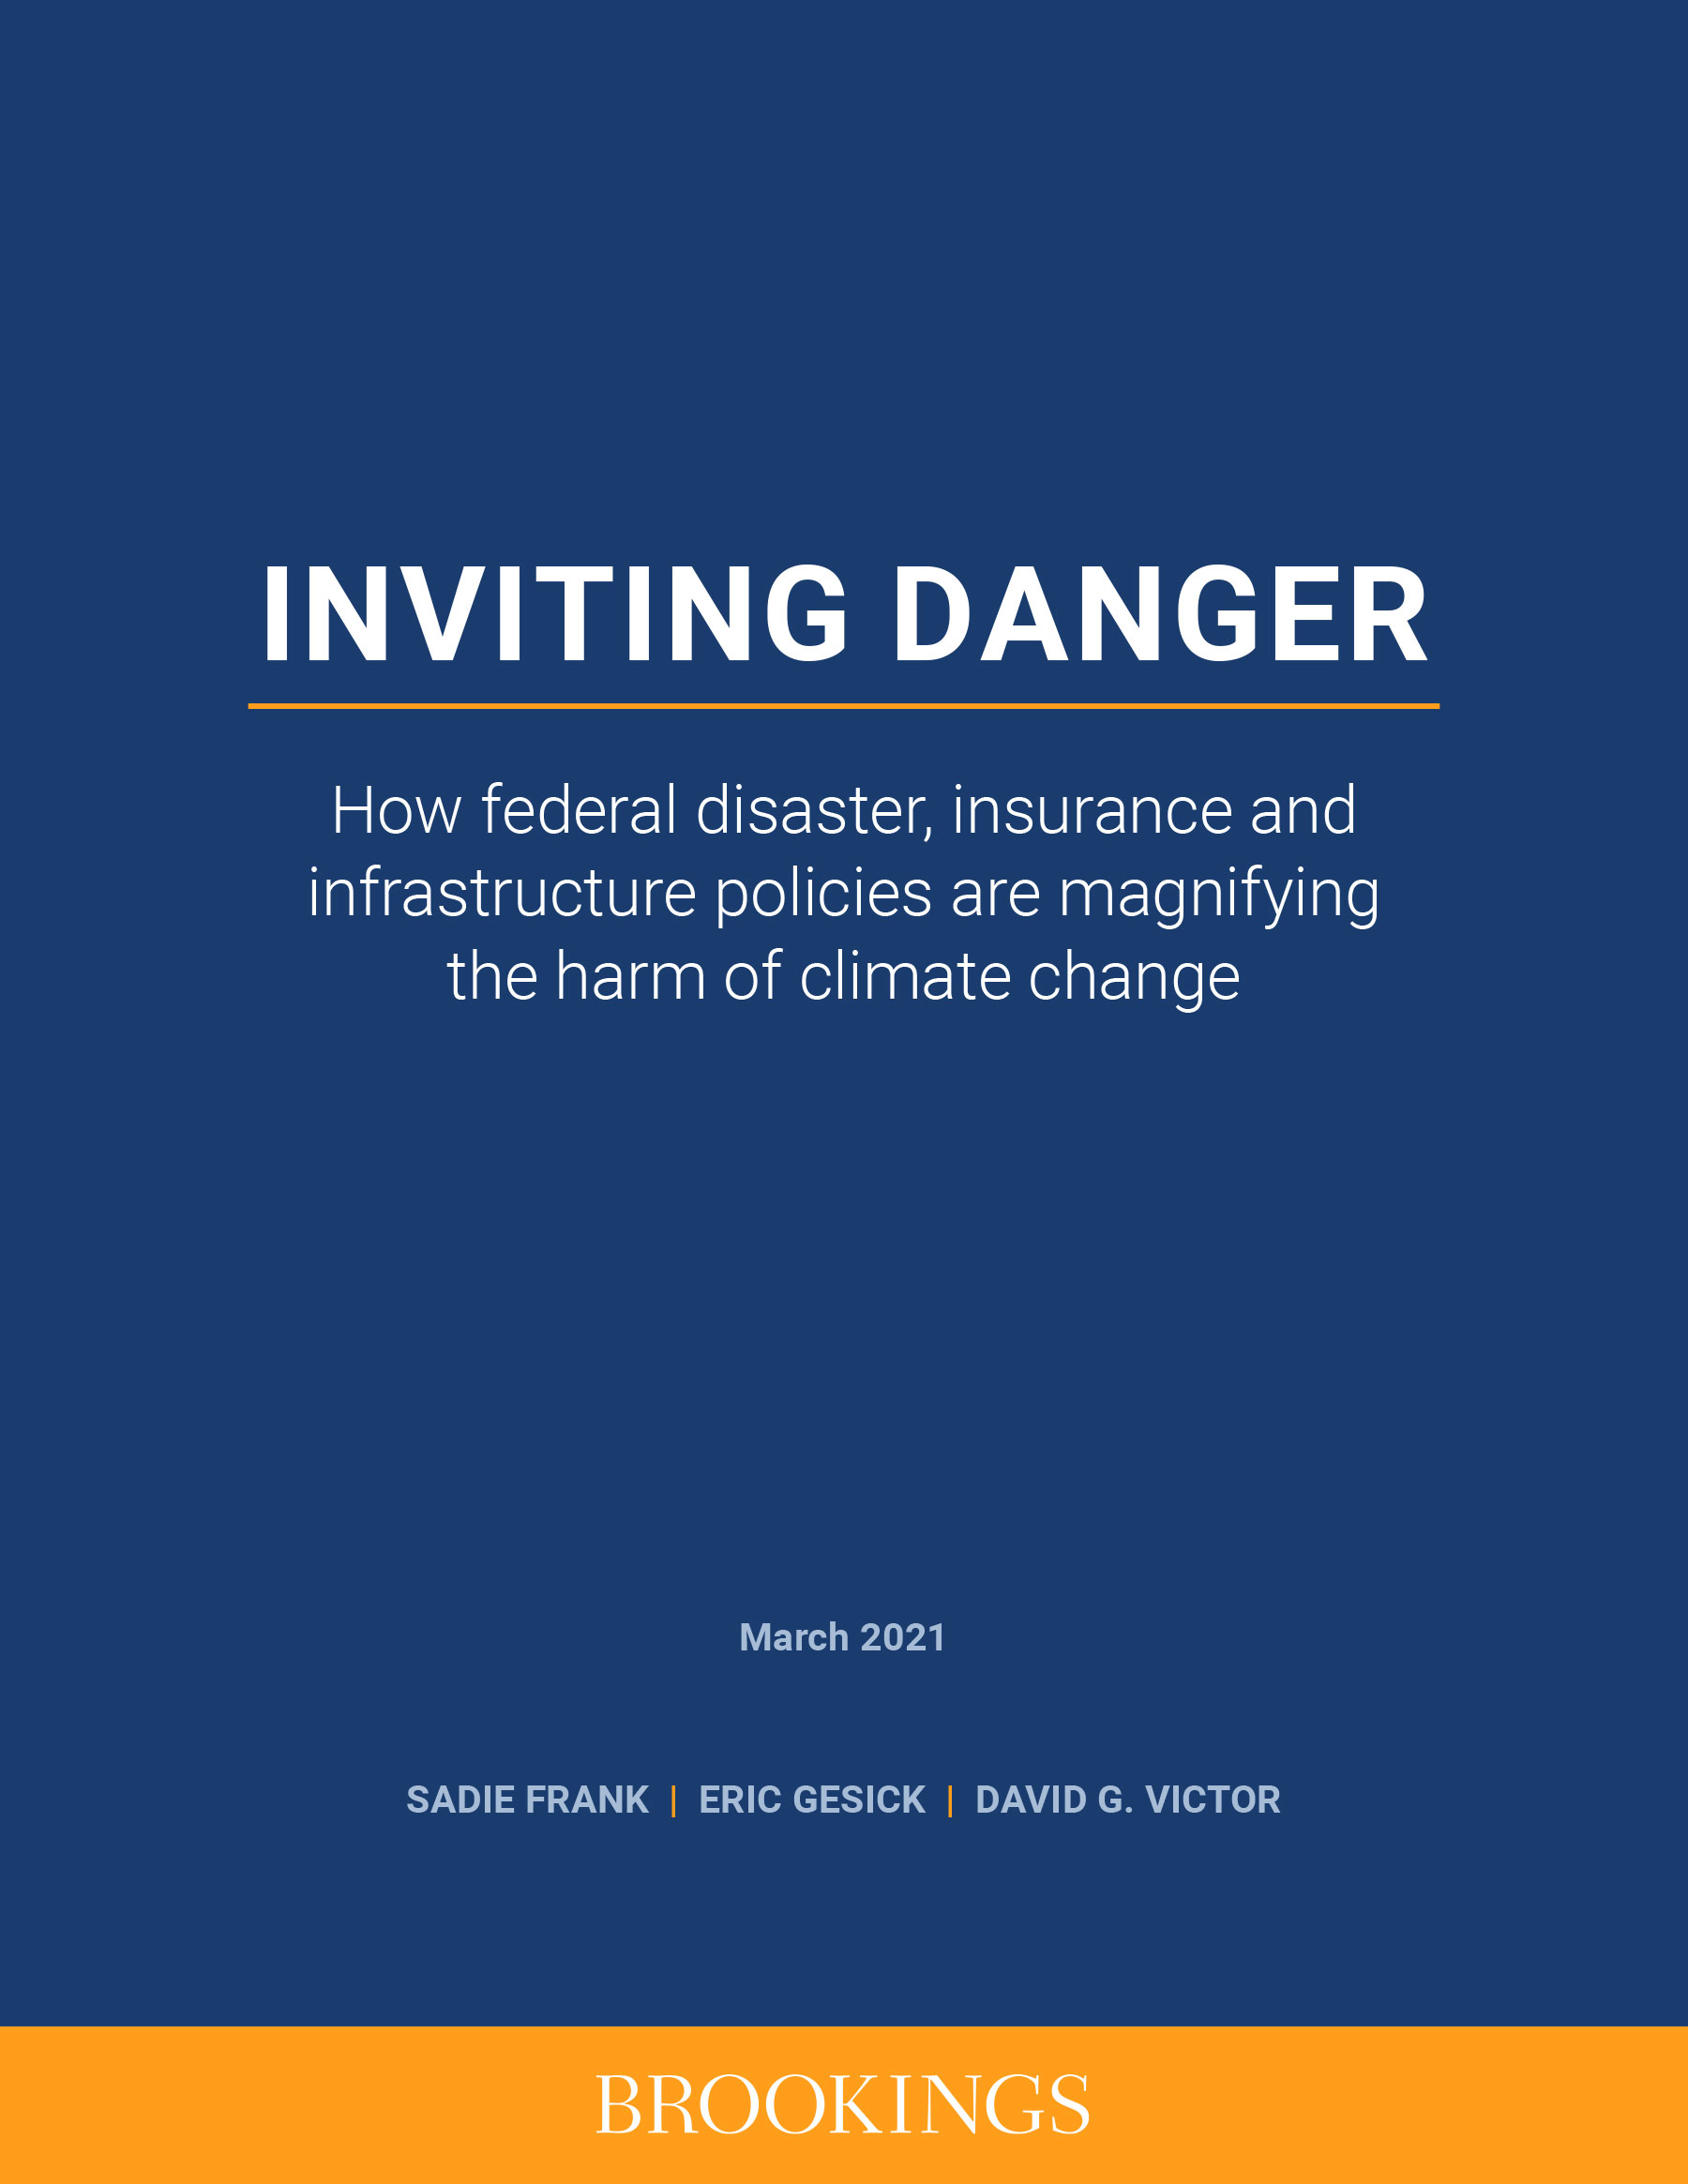 Inviting_Danger_US_Policies_Magnifying_Harm_of_Climate_Change